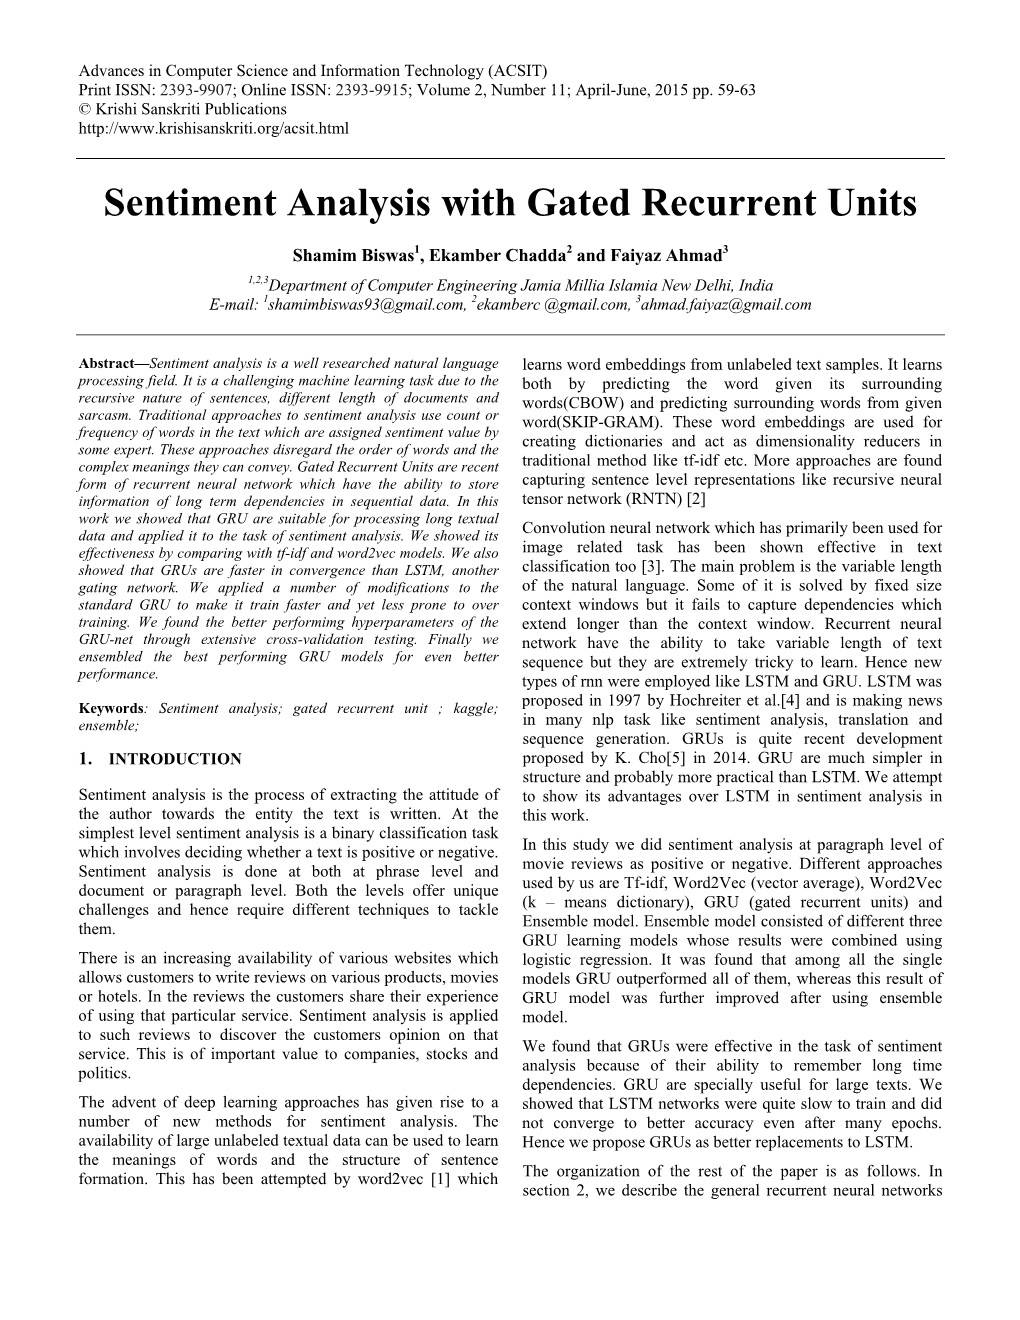 Sentiment Analysis with Gated Recurrent Units